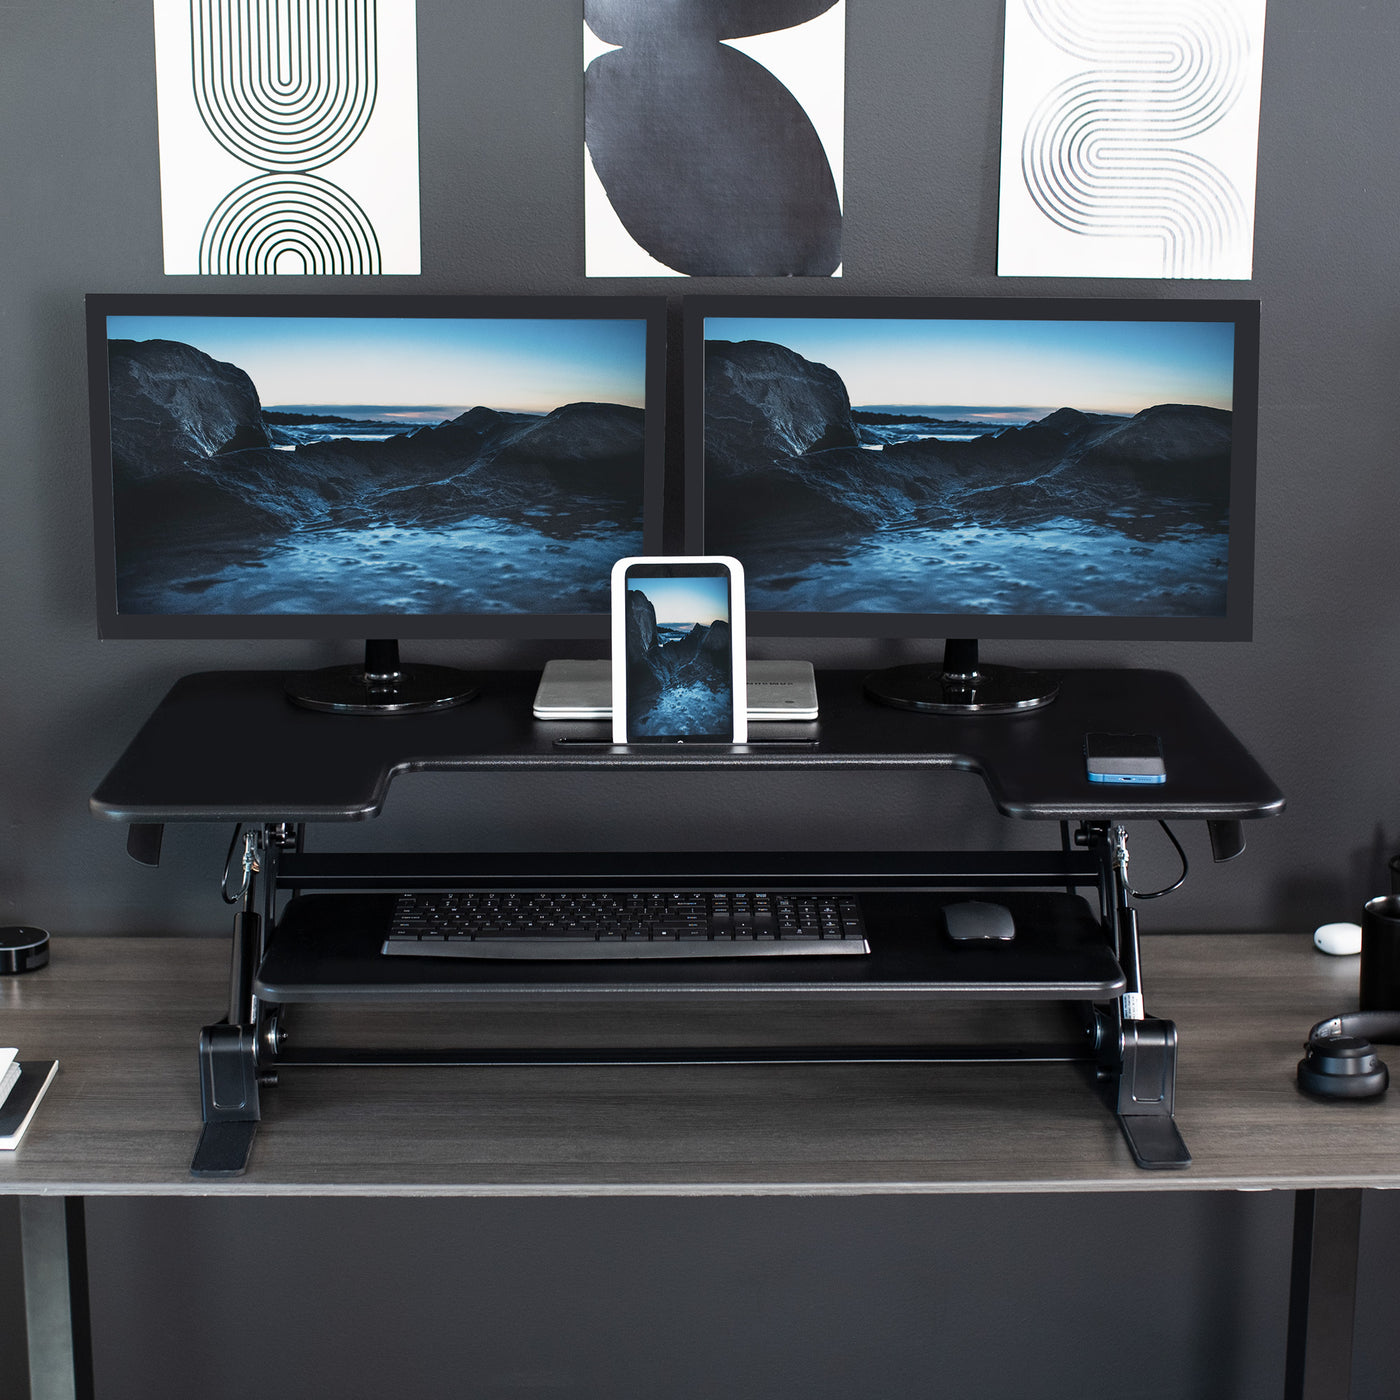 Desk converter in use with two monitors with device propped up in designated device holder slot.